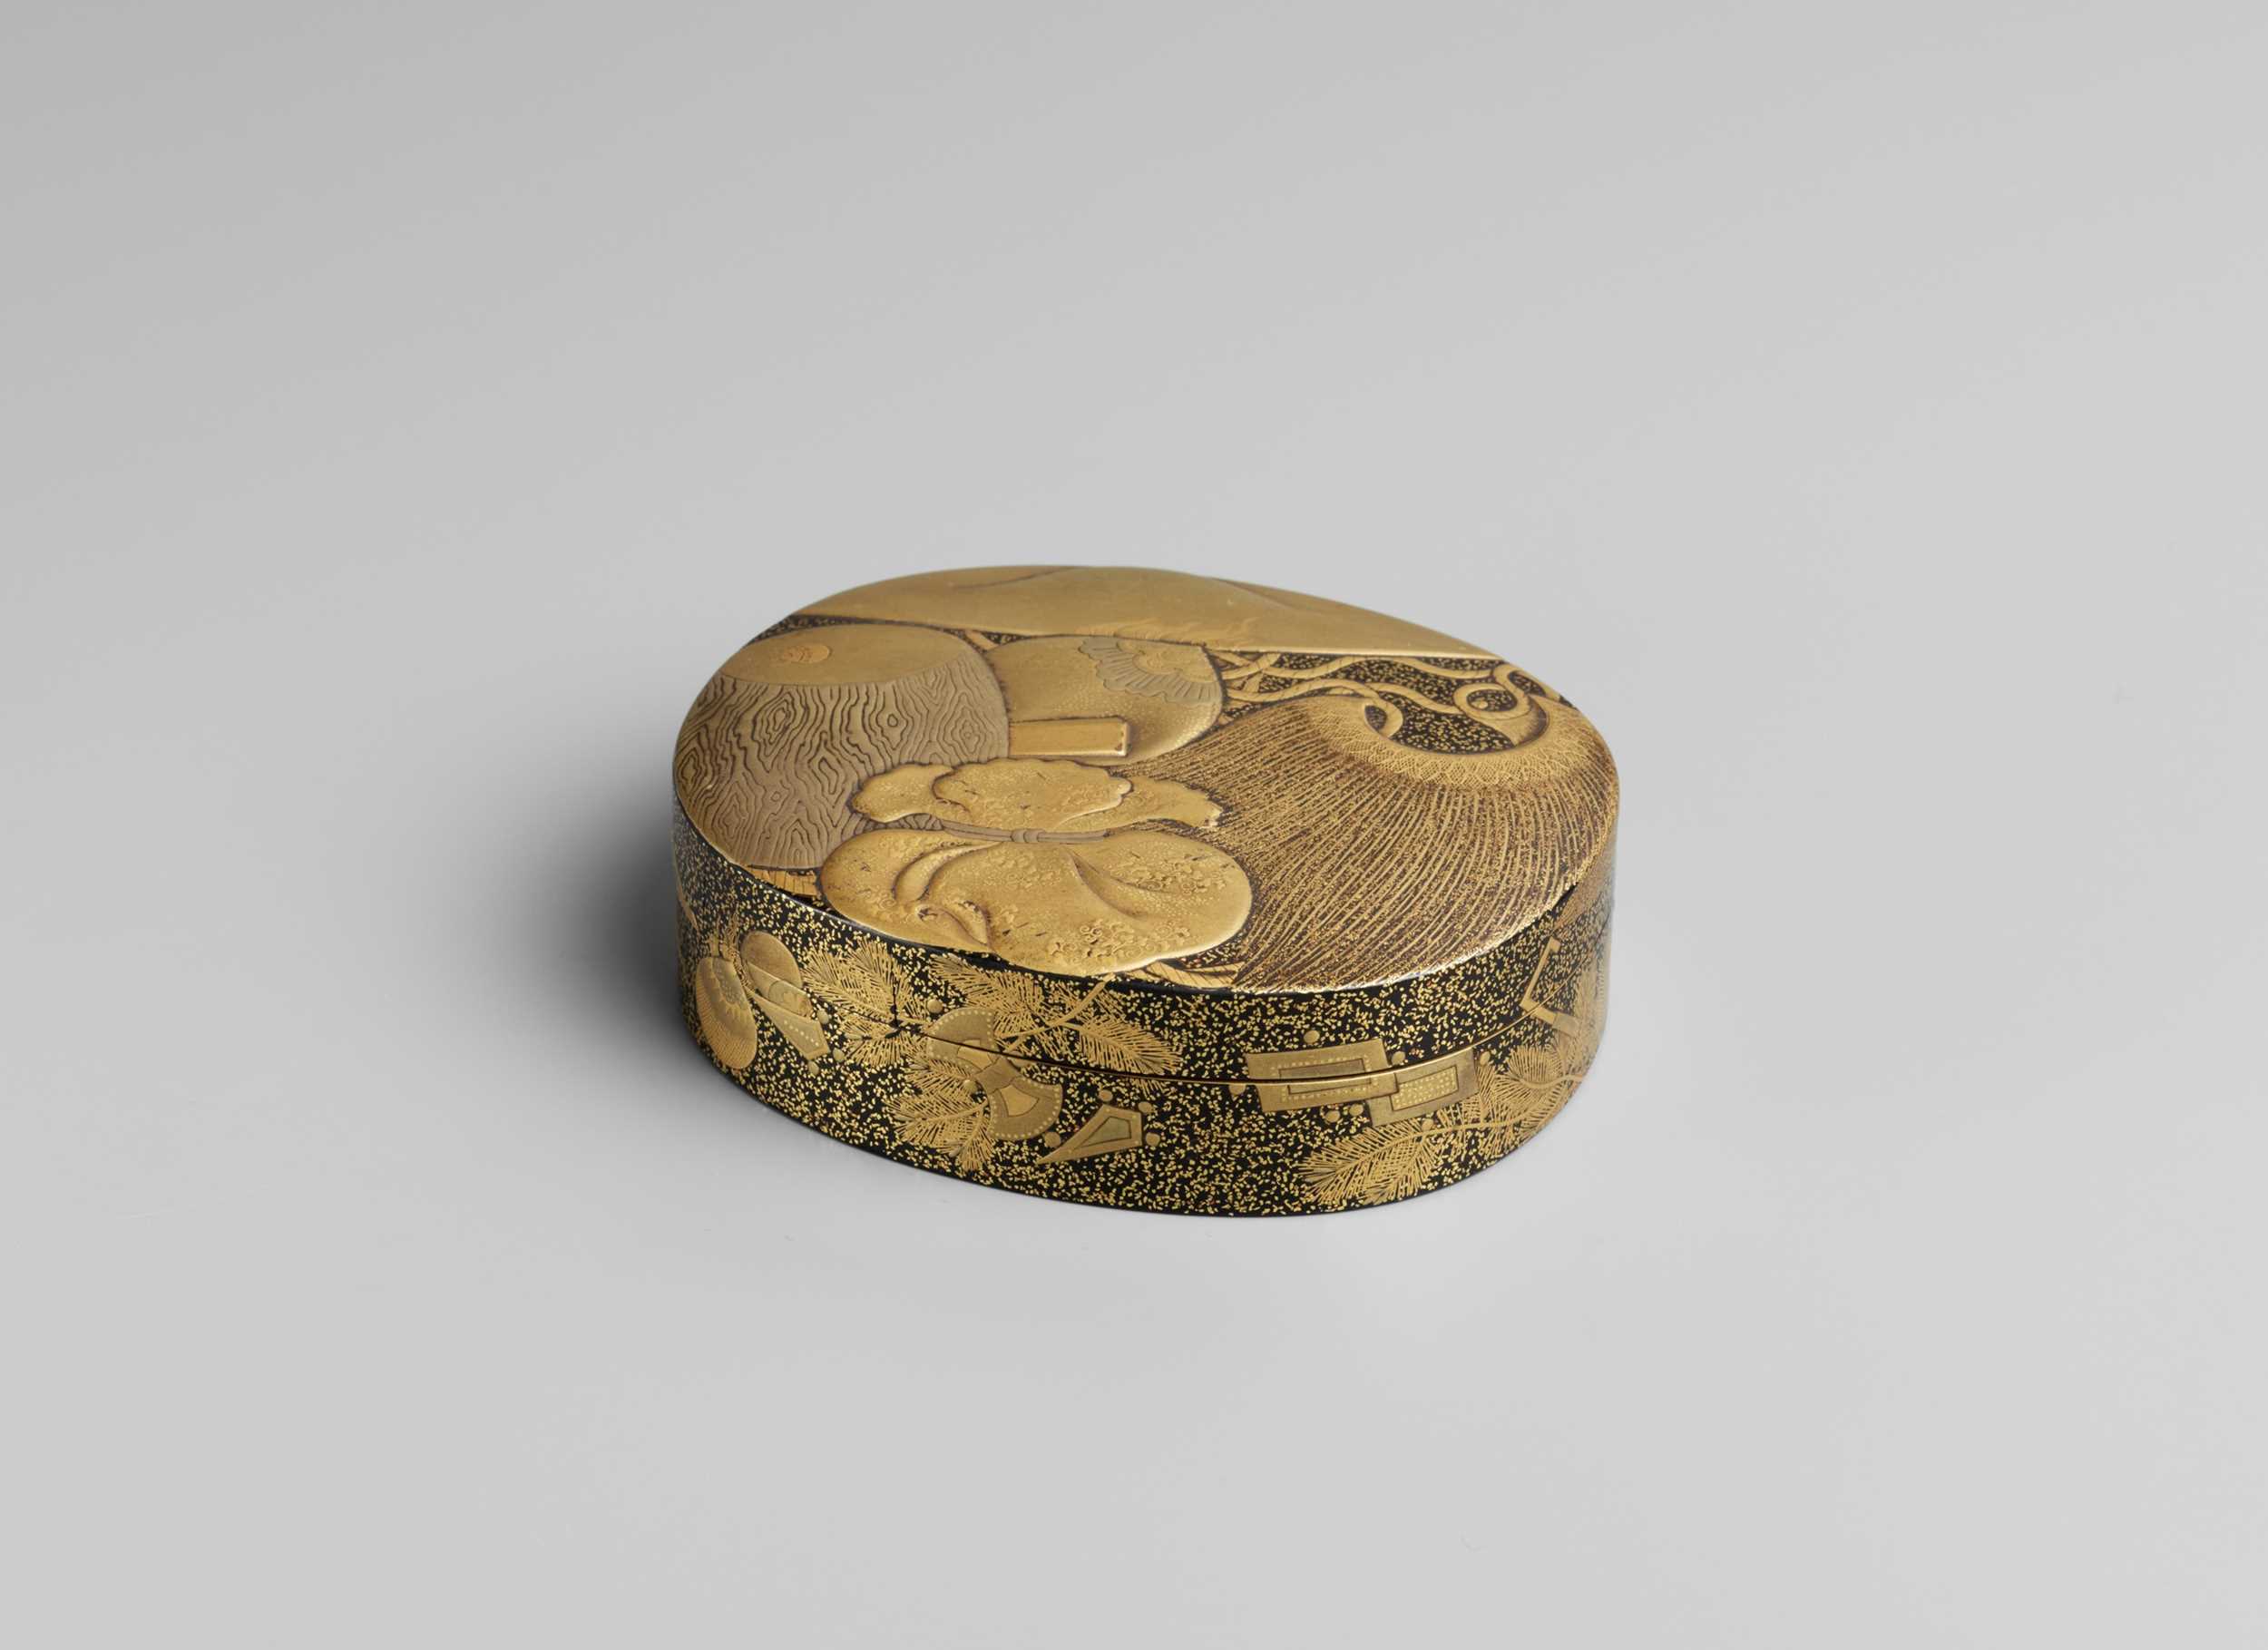 Lot 105 - A GOLD LACQUER KOGO (INCENSE CONTAINER) WITH LUCKY OBJECTS (TAKARAMONO)